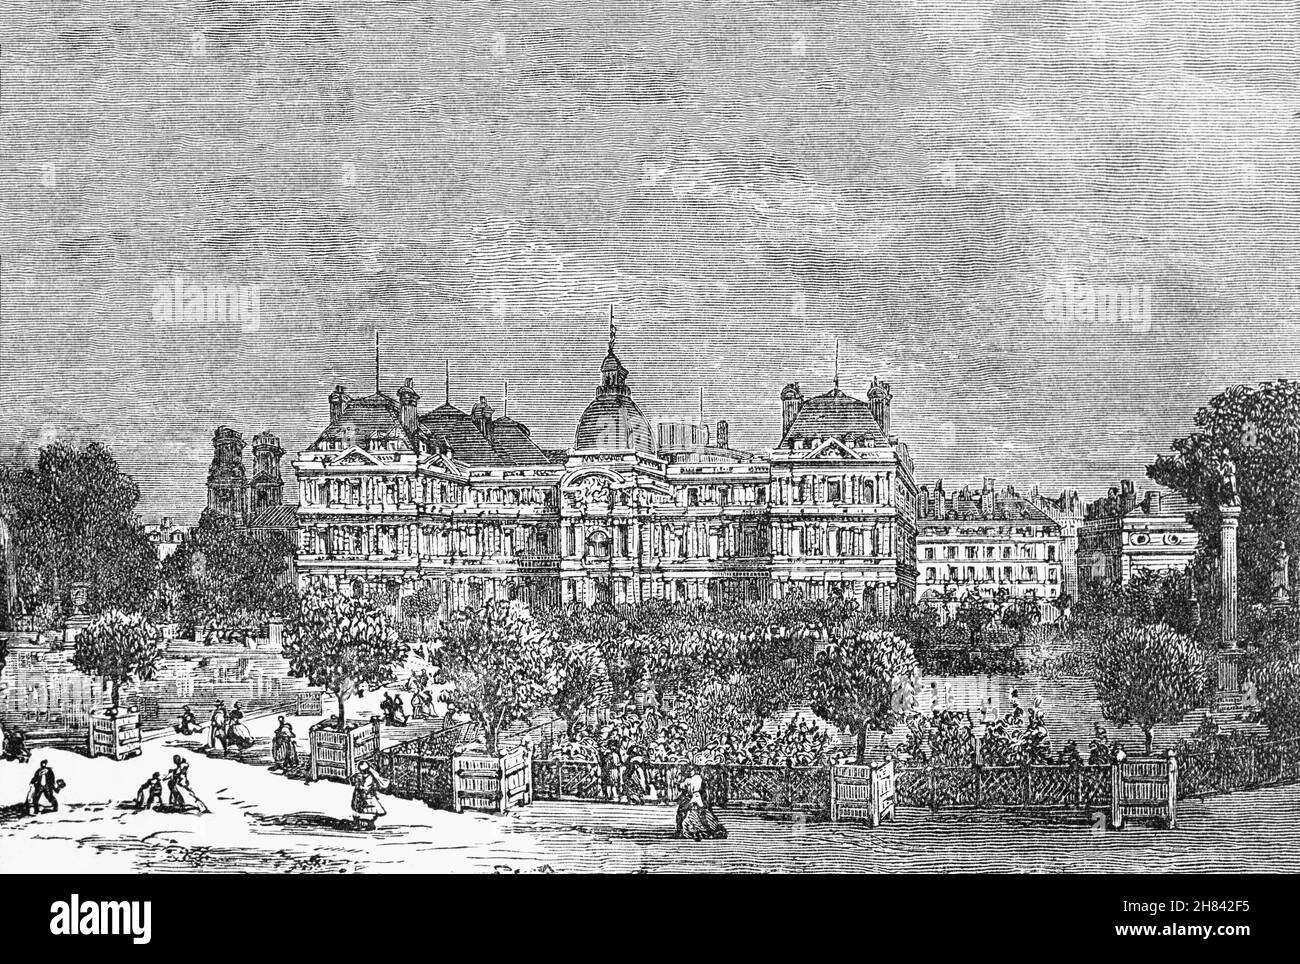 A late 19th Century illustration of the Luxembourg Palace in the 6th arrondissement of Paris, France. It was originally built (1615–1645) to the designs of the French architect Salomon de Brosse to be the royal residence of the regent Marie de' Medici, mother of King Louis XIII. After the Revolution it was refashioned into a legislative building, enlarged and remodeled. It is now home to the Senate of the Fifth Republic since its establishment in 1958. Stock Photo